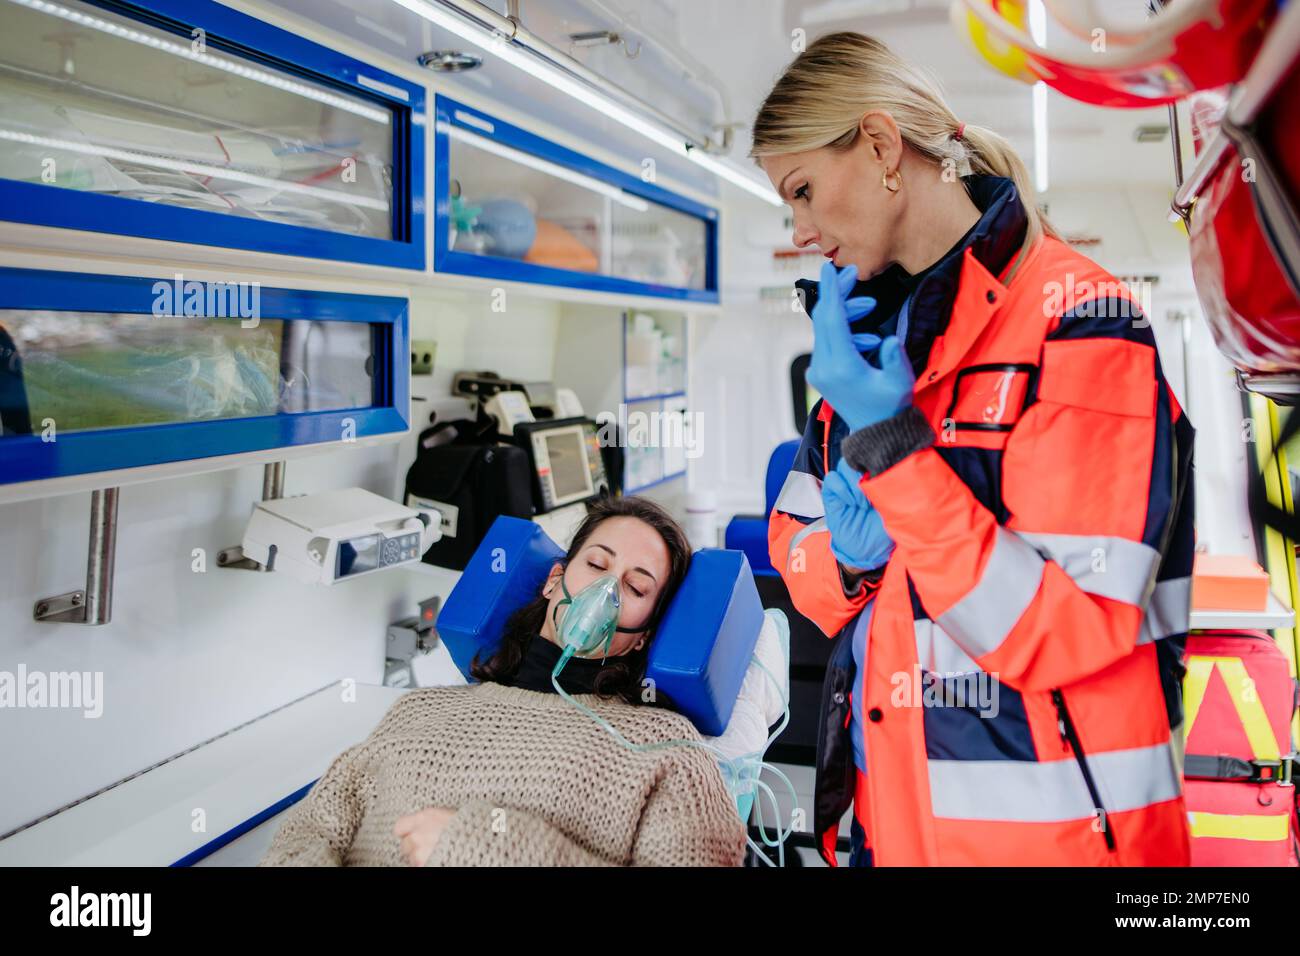 Rescuer taking care of patient, preparing her for transport. Stock Photo